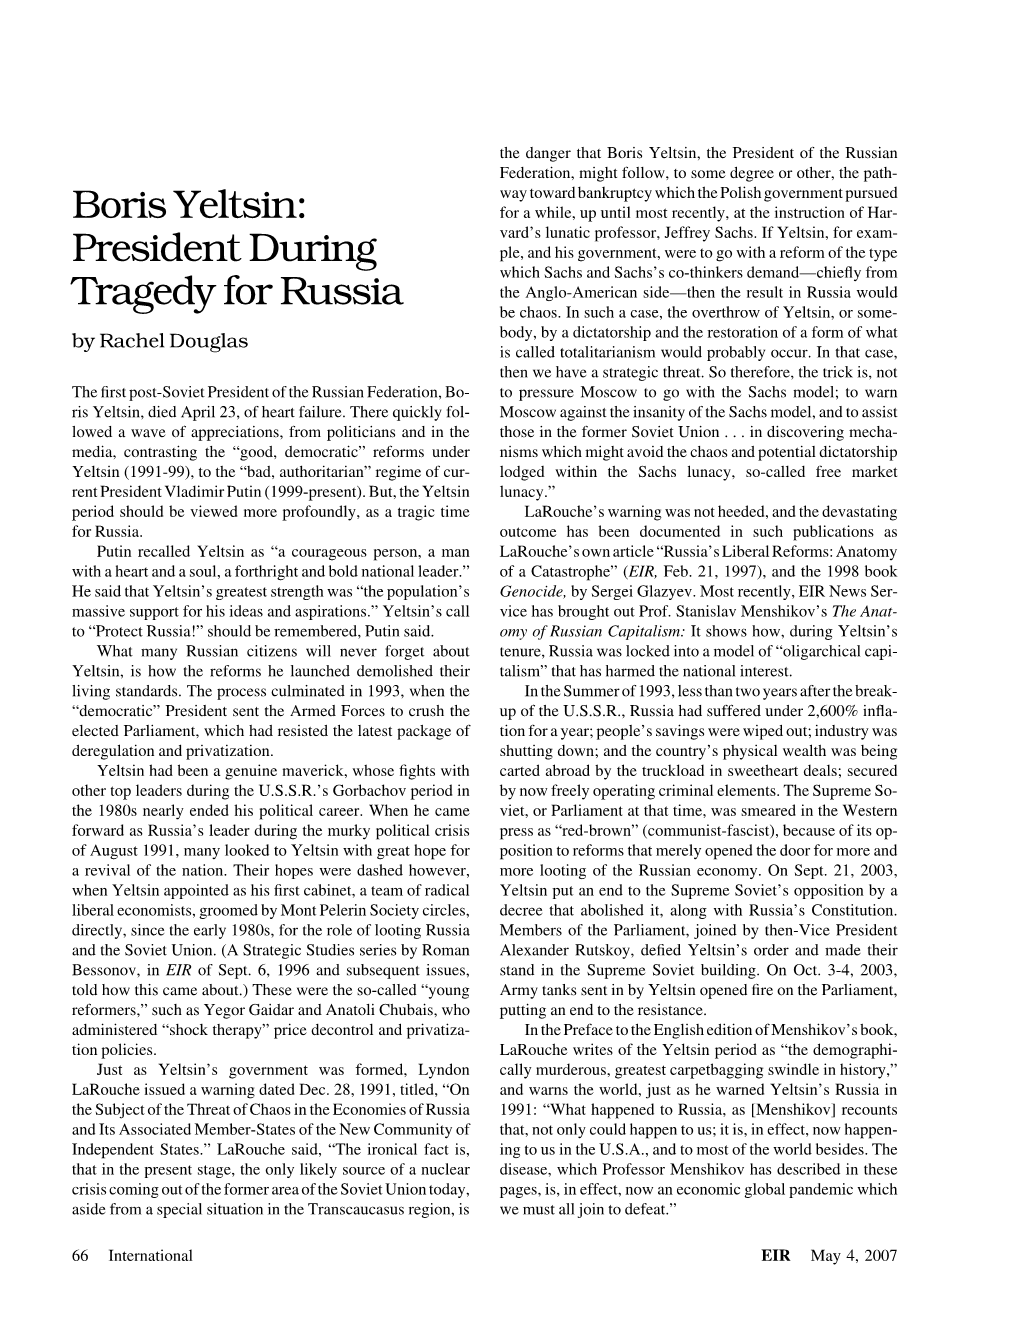 Boris Yeltsin: President During Tragedy for Russia